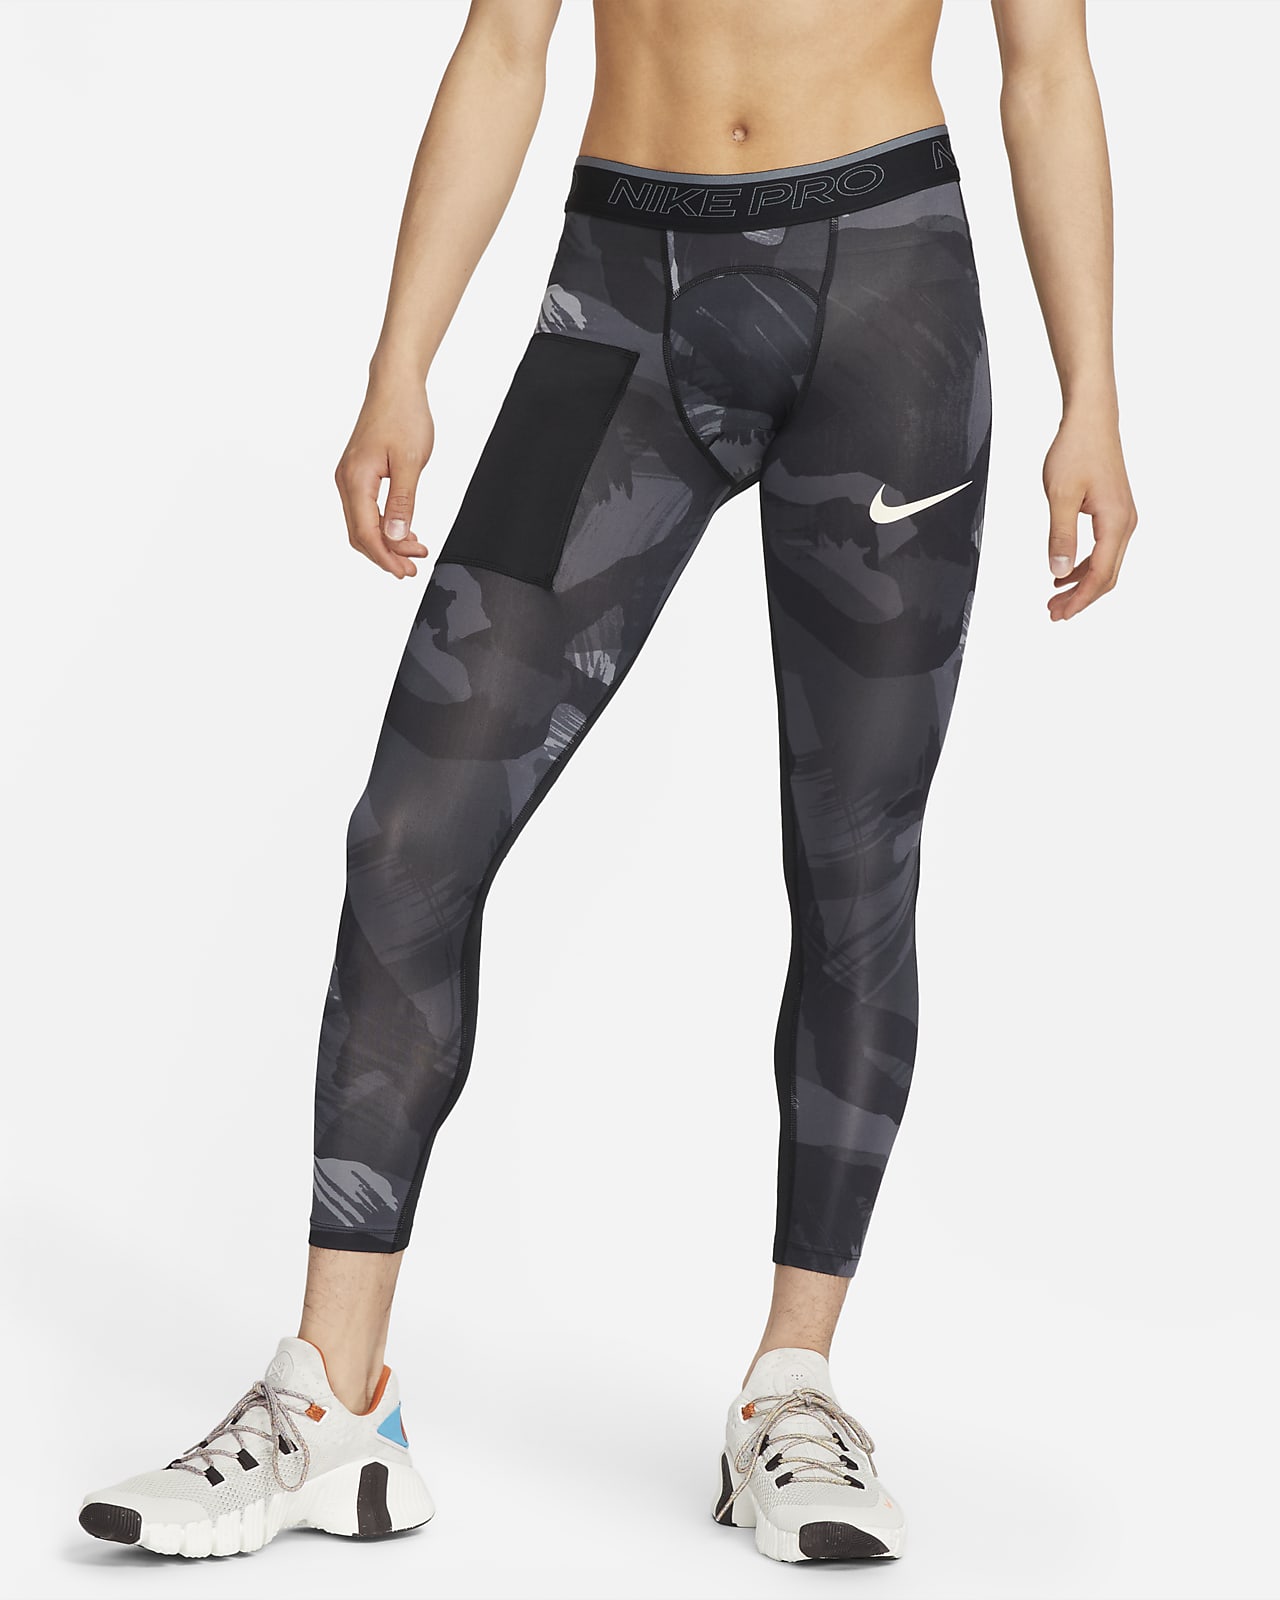 Misvisende Mary Og hold Nike Pro Dri-FIT Men's Camo Tights. Nike.com